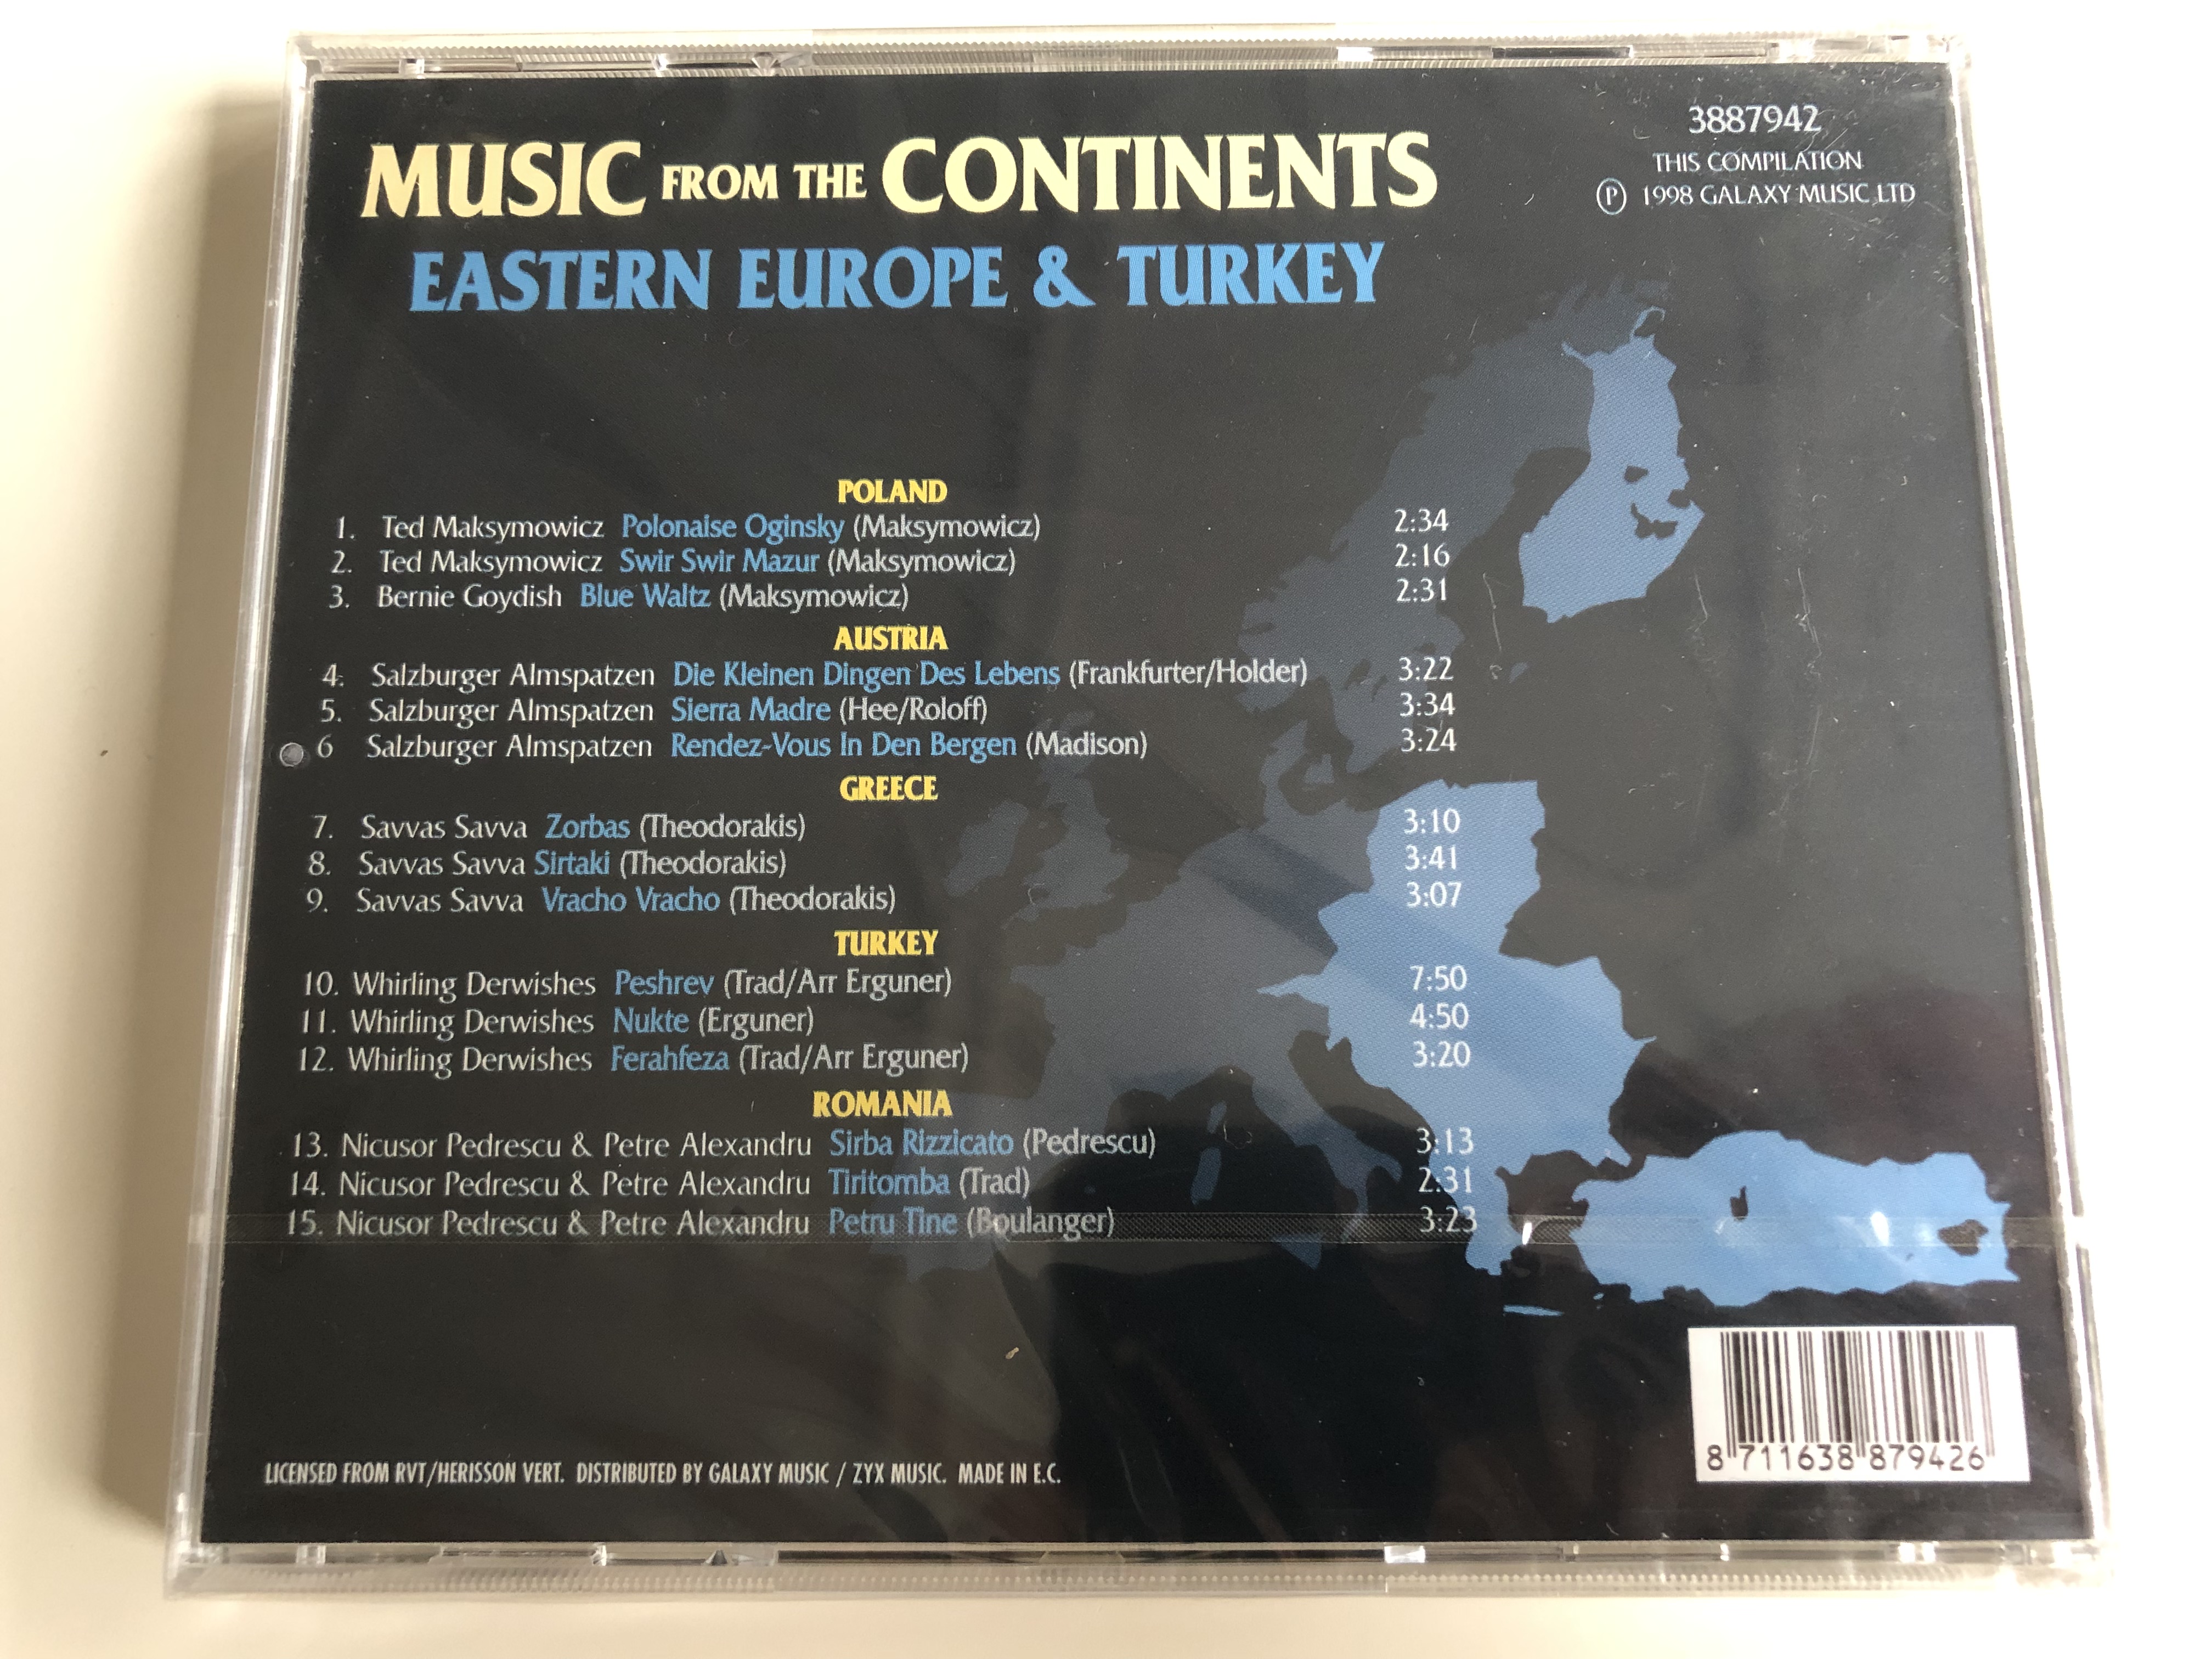 music-from-the-continents-eastern-europe-turkeyimg-1780.jpg